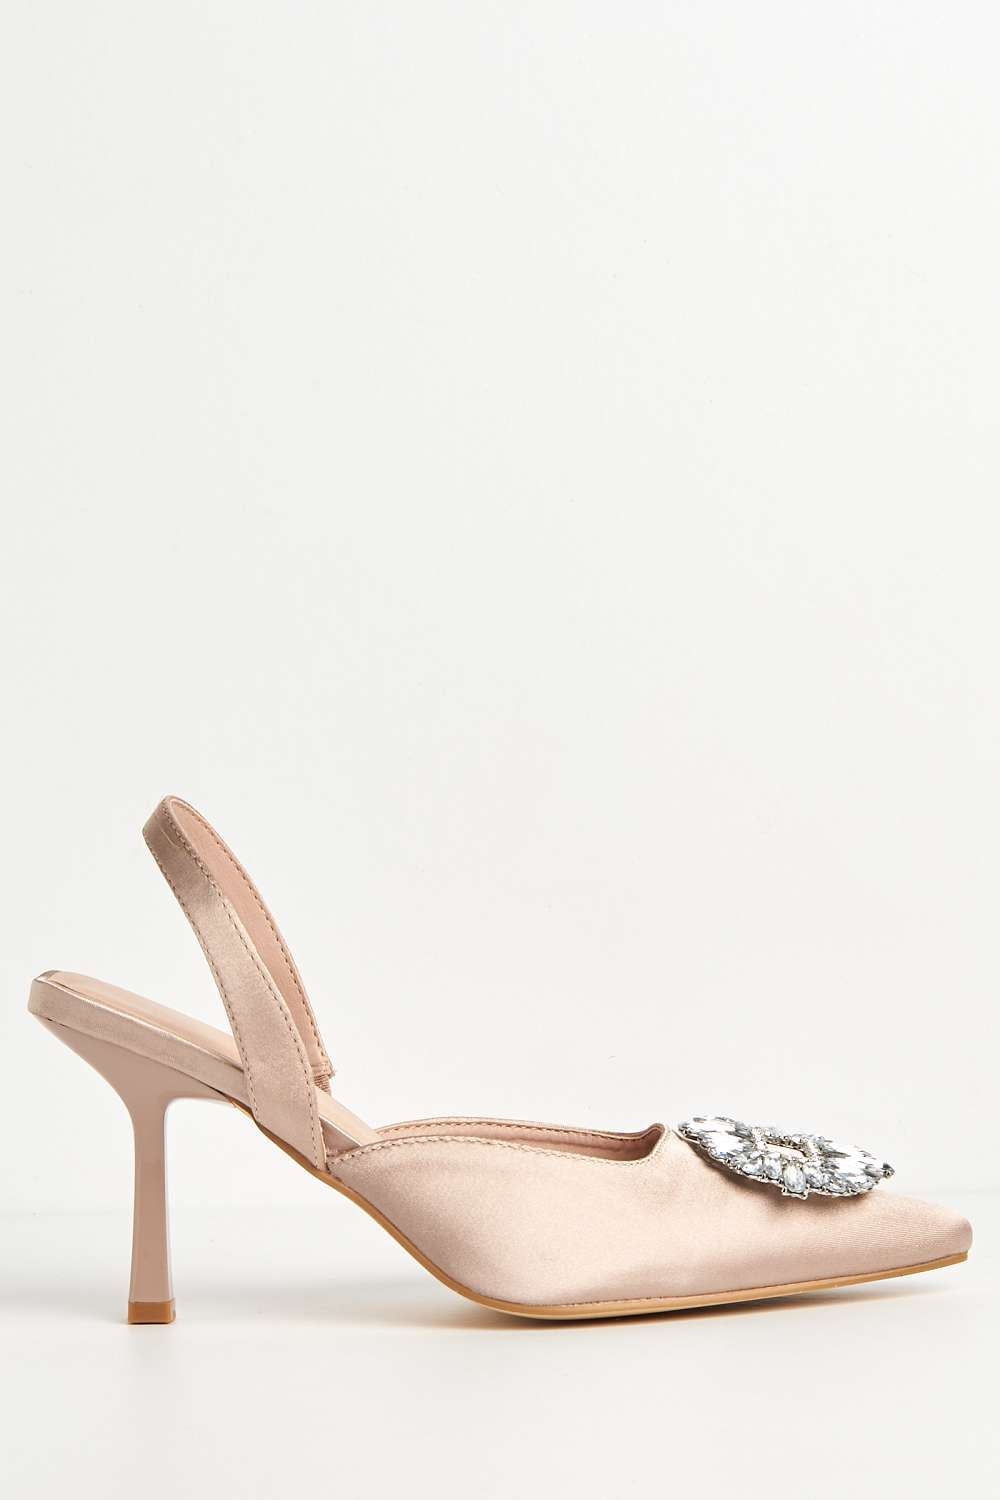 Miss Diva Amira Diamante Brooch Sling Back Court Shoes in Champagne Satin